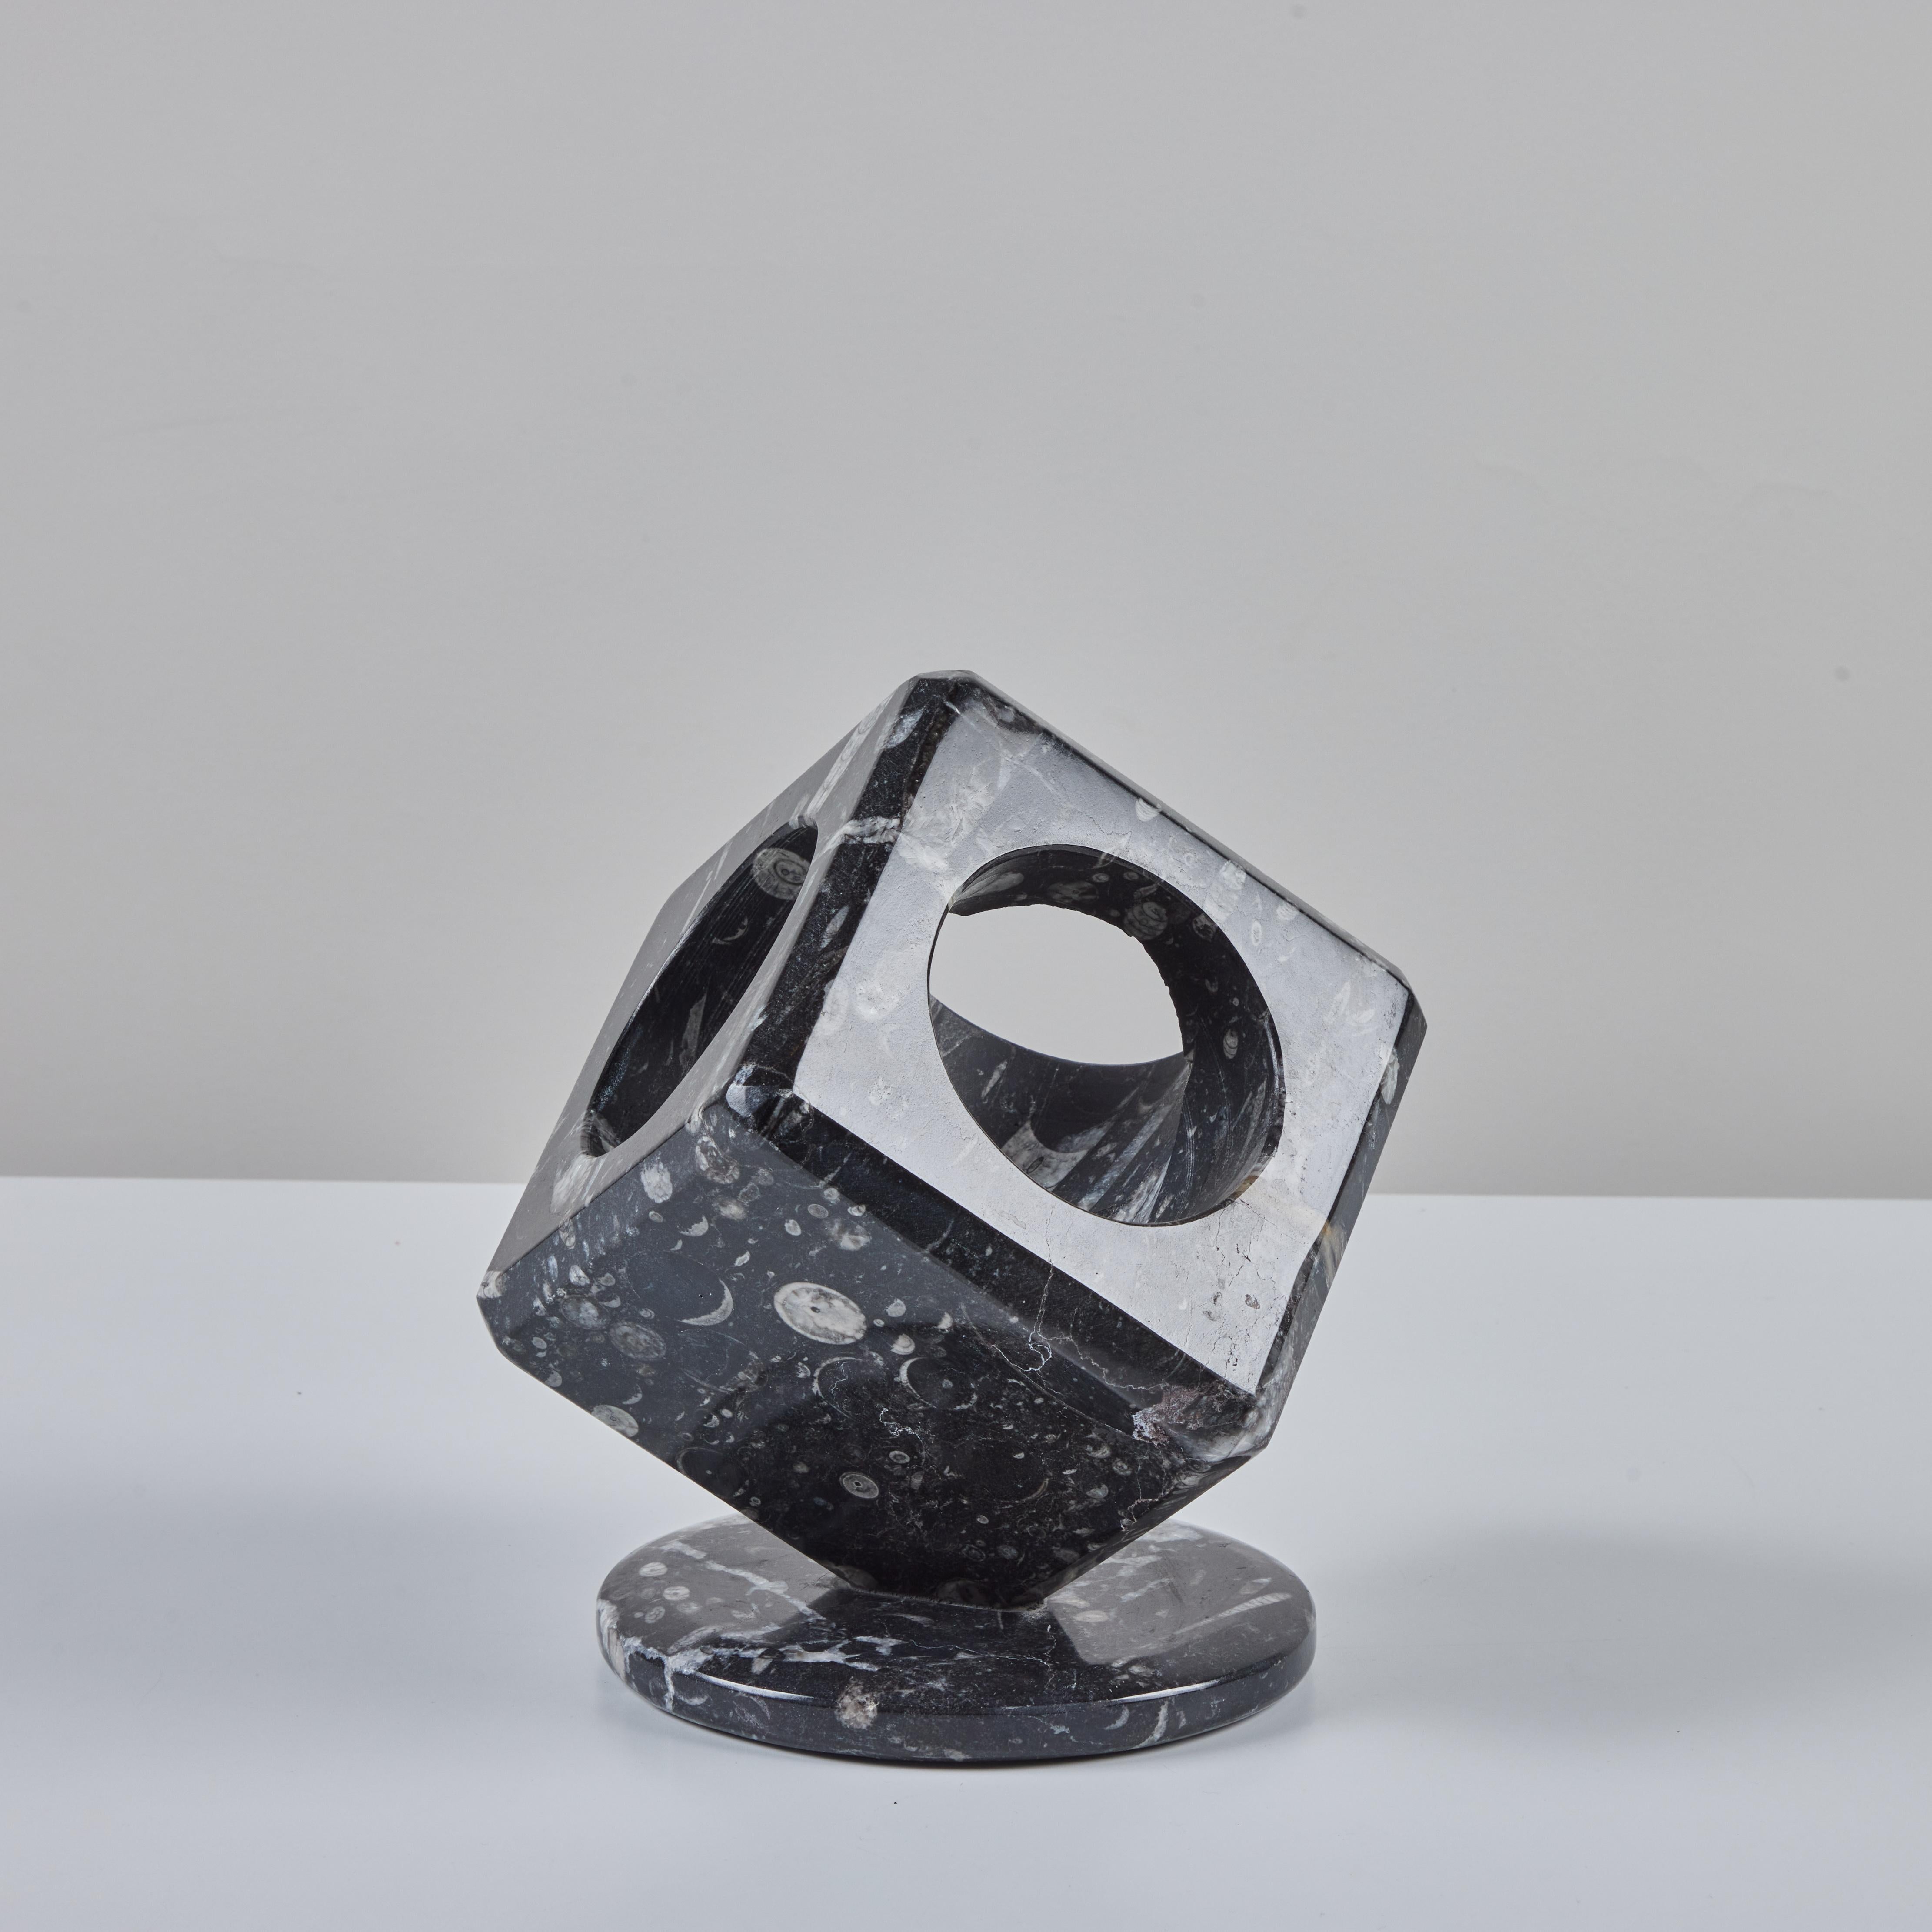 Black marble sculpture set on a round marble base. The sculpture features a polished exterior stone with cream veining and fossils throughout. Three sides of the cubic sculpture have a circular cutouts and hollowed out interior, which showcases a